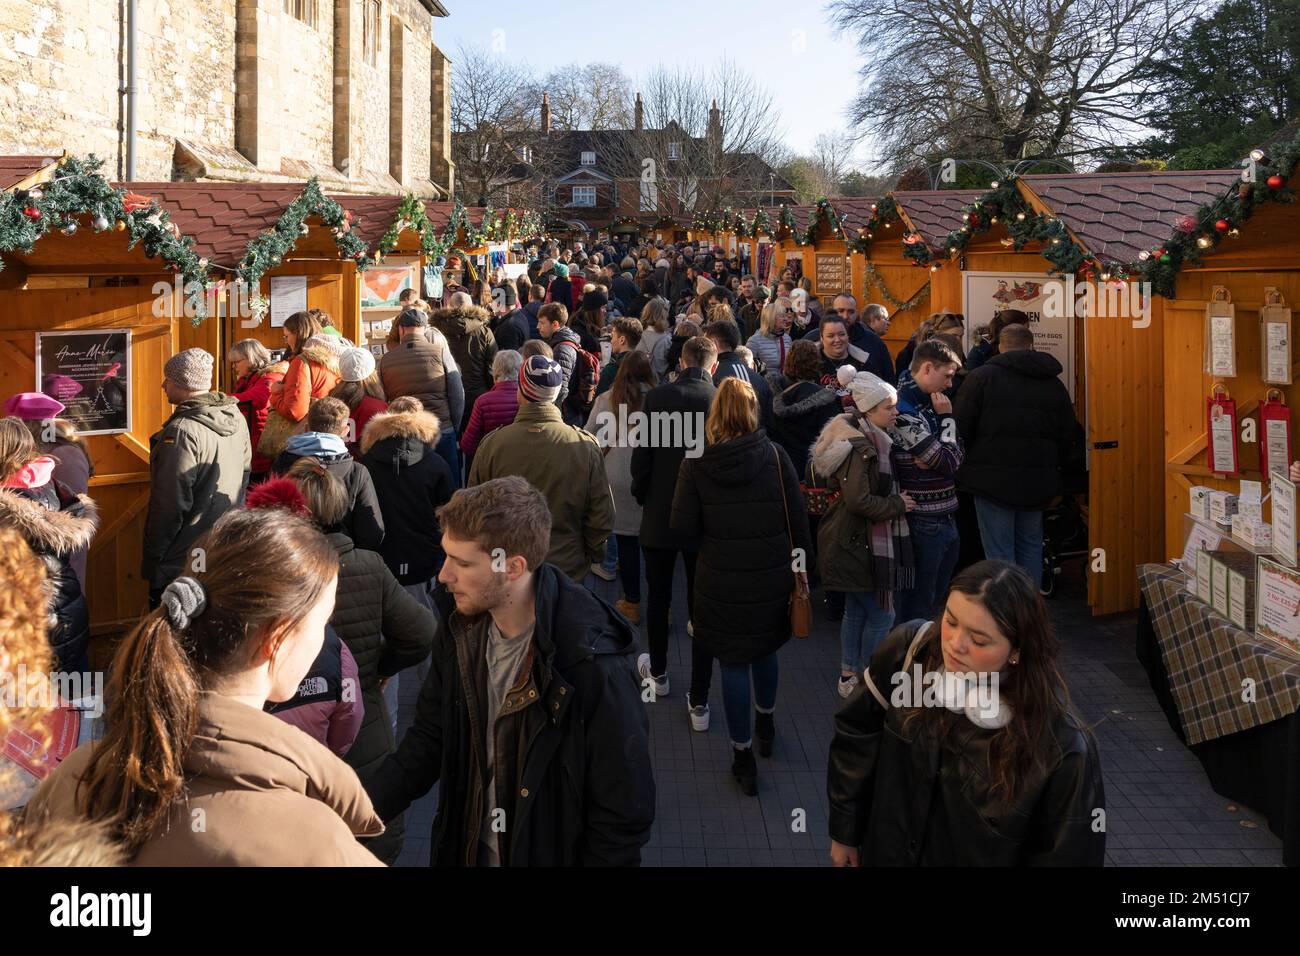 Christmas shoppers at Winchester Christmas market with wooden chalets next to the medieval historic walls of gothic Winchester Cathedral, England, UK Stock Photo